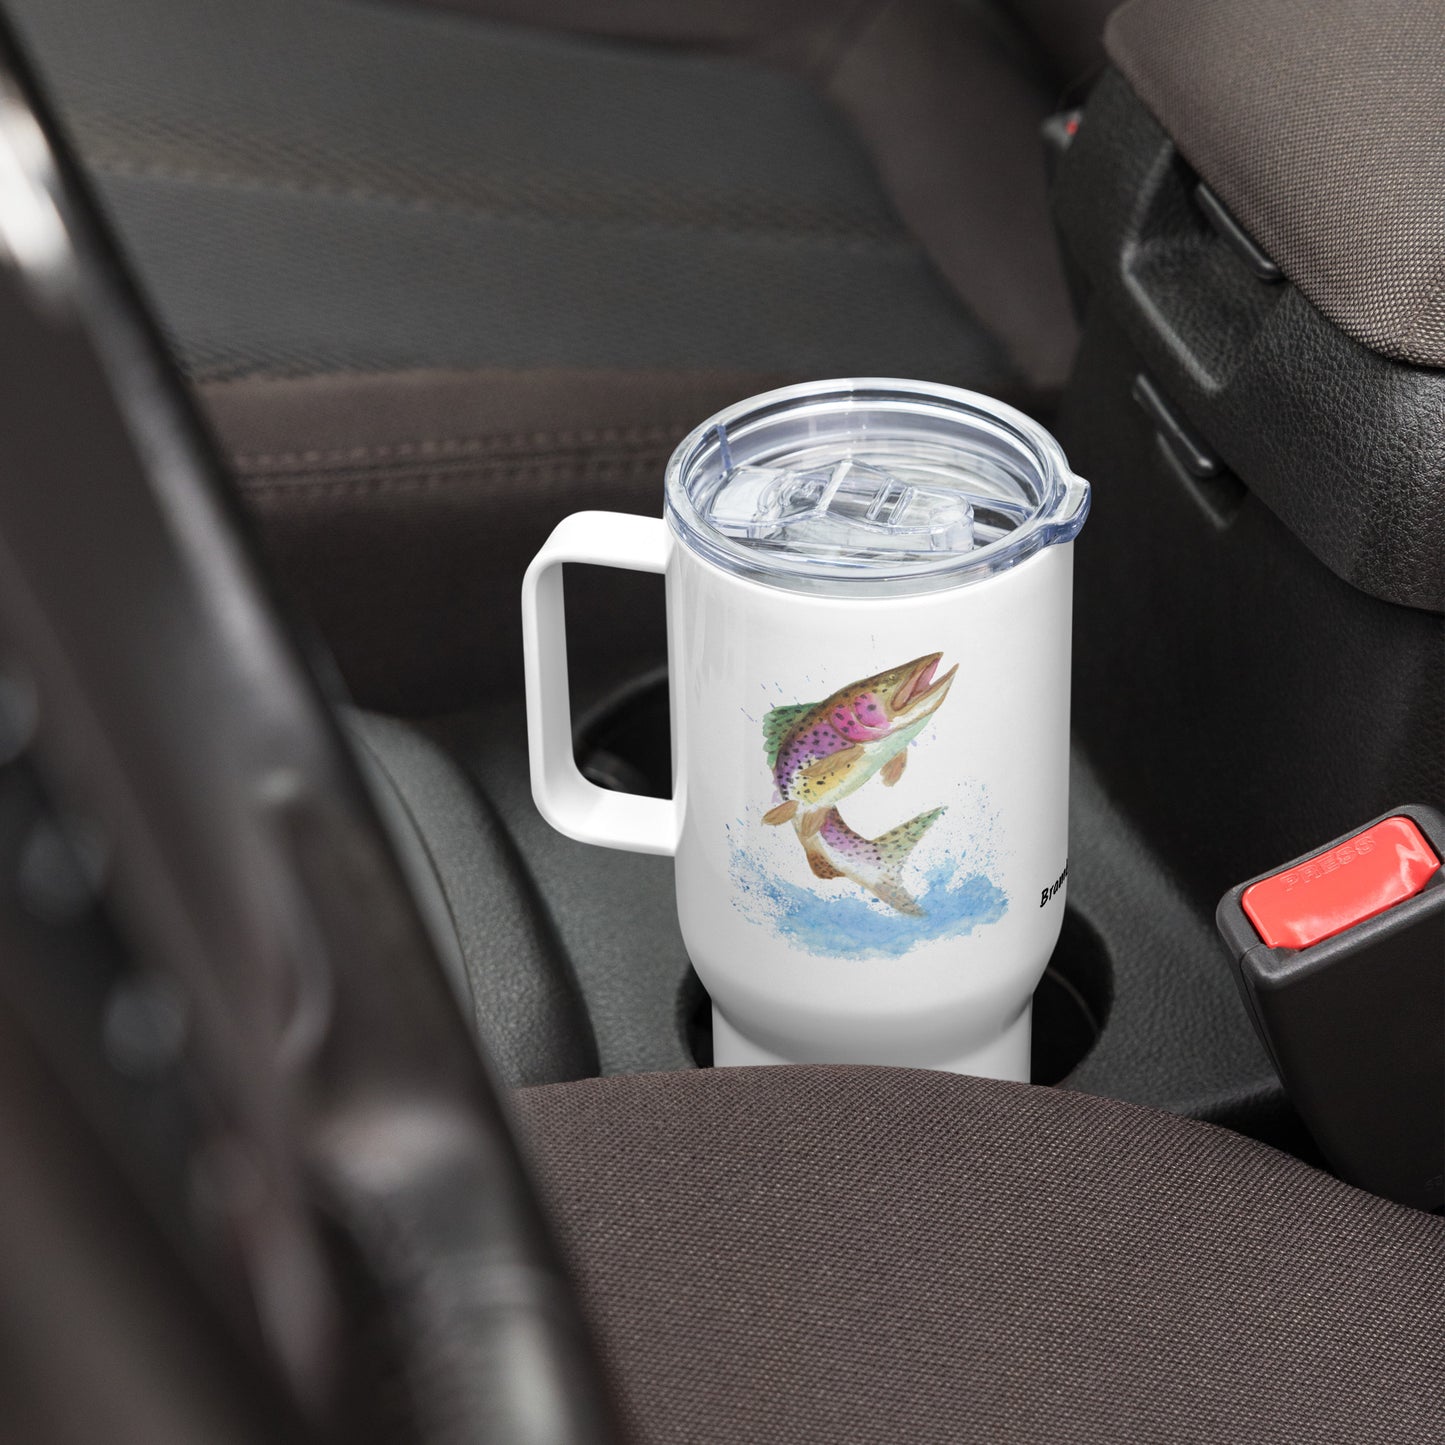 Stainless steel travel mug with handle. Holds 25 ounces of hot or cold drinks. Has print of watercolor rainbow trout fish on both sides. Fits most car cup holders. Comes with spill-proof BPA-free plastic lid. Shown in car cup holder with handle facing left.